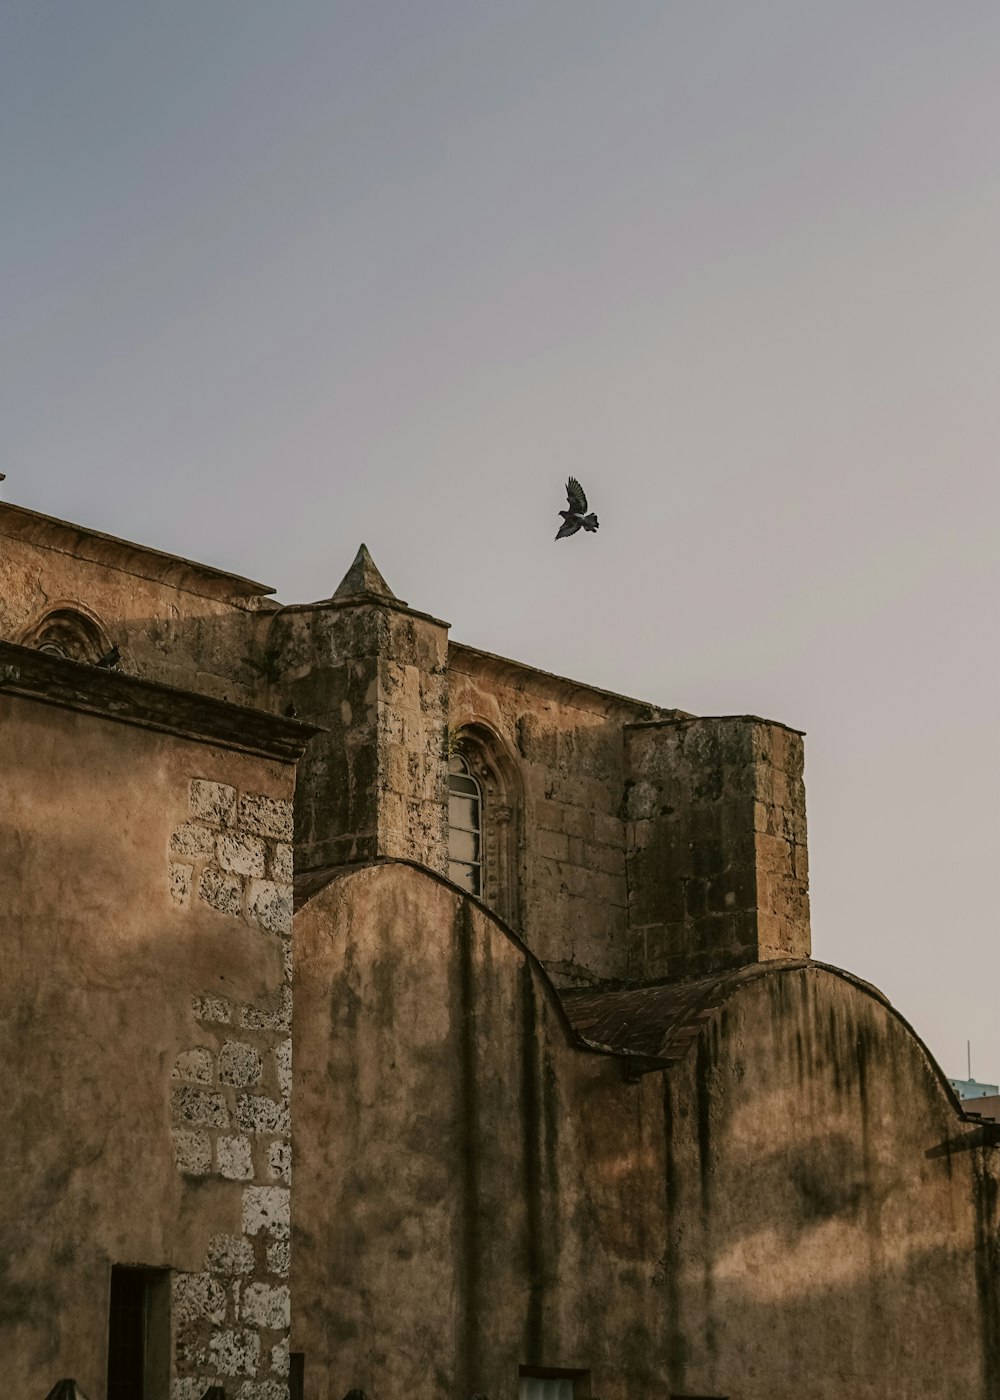 a bird flying over a building with a bird on top of it